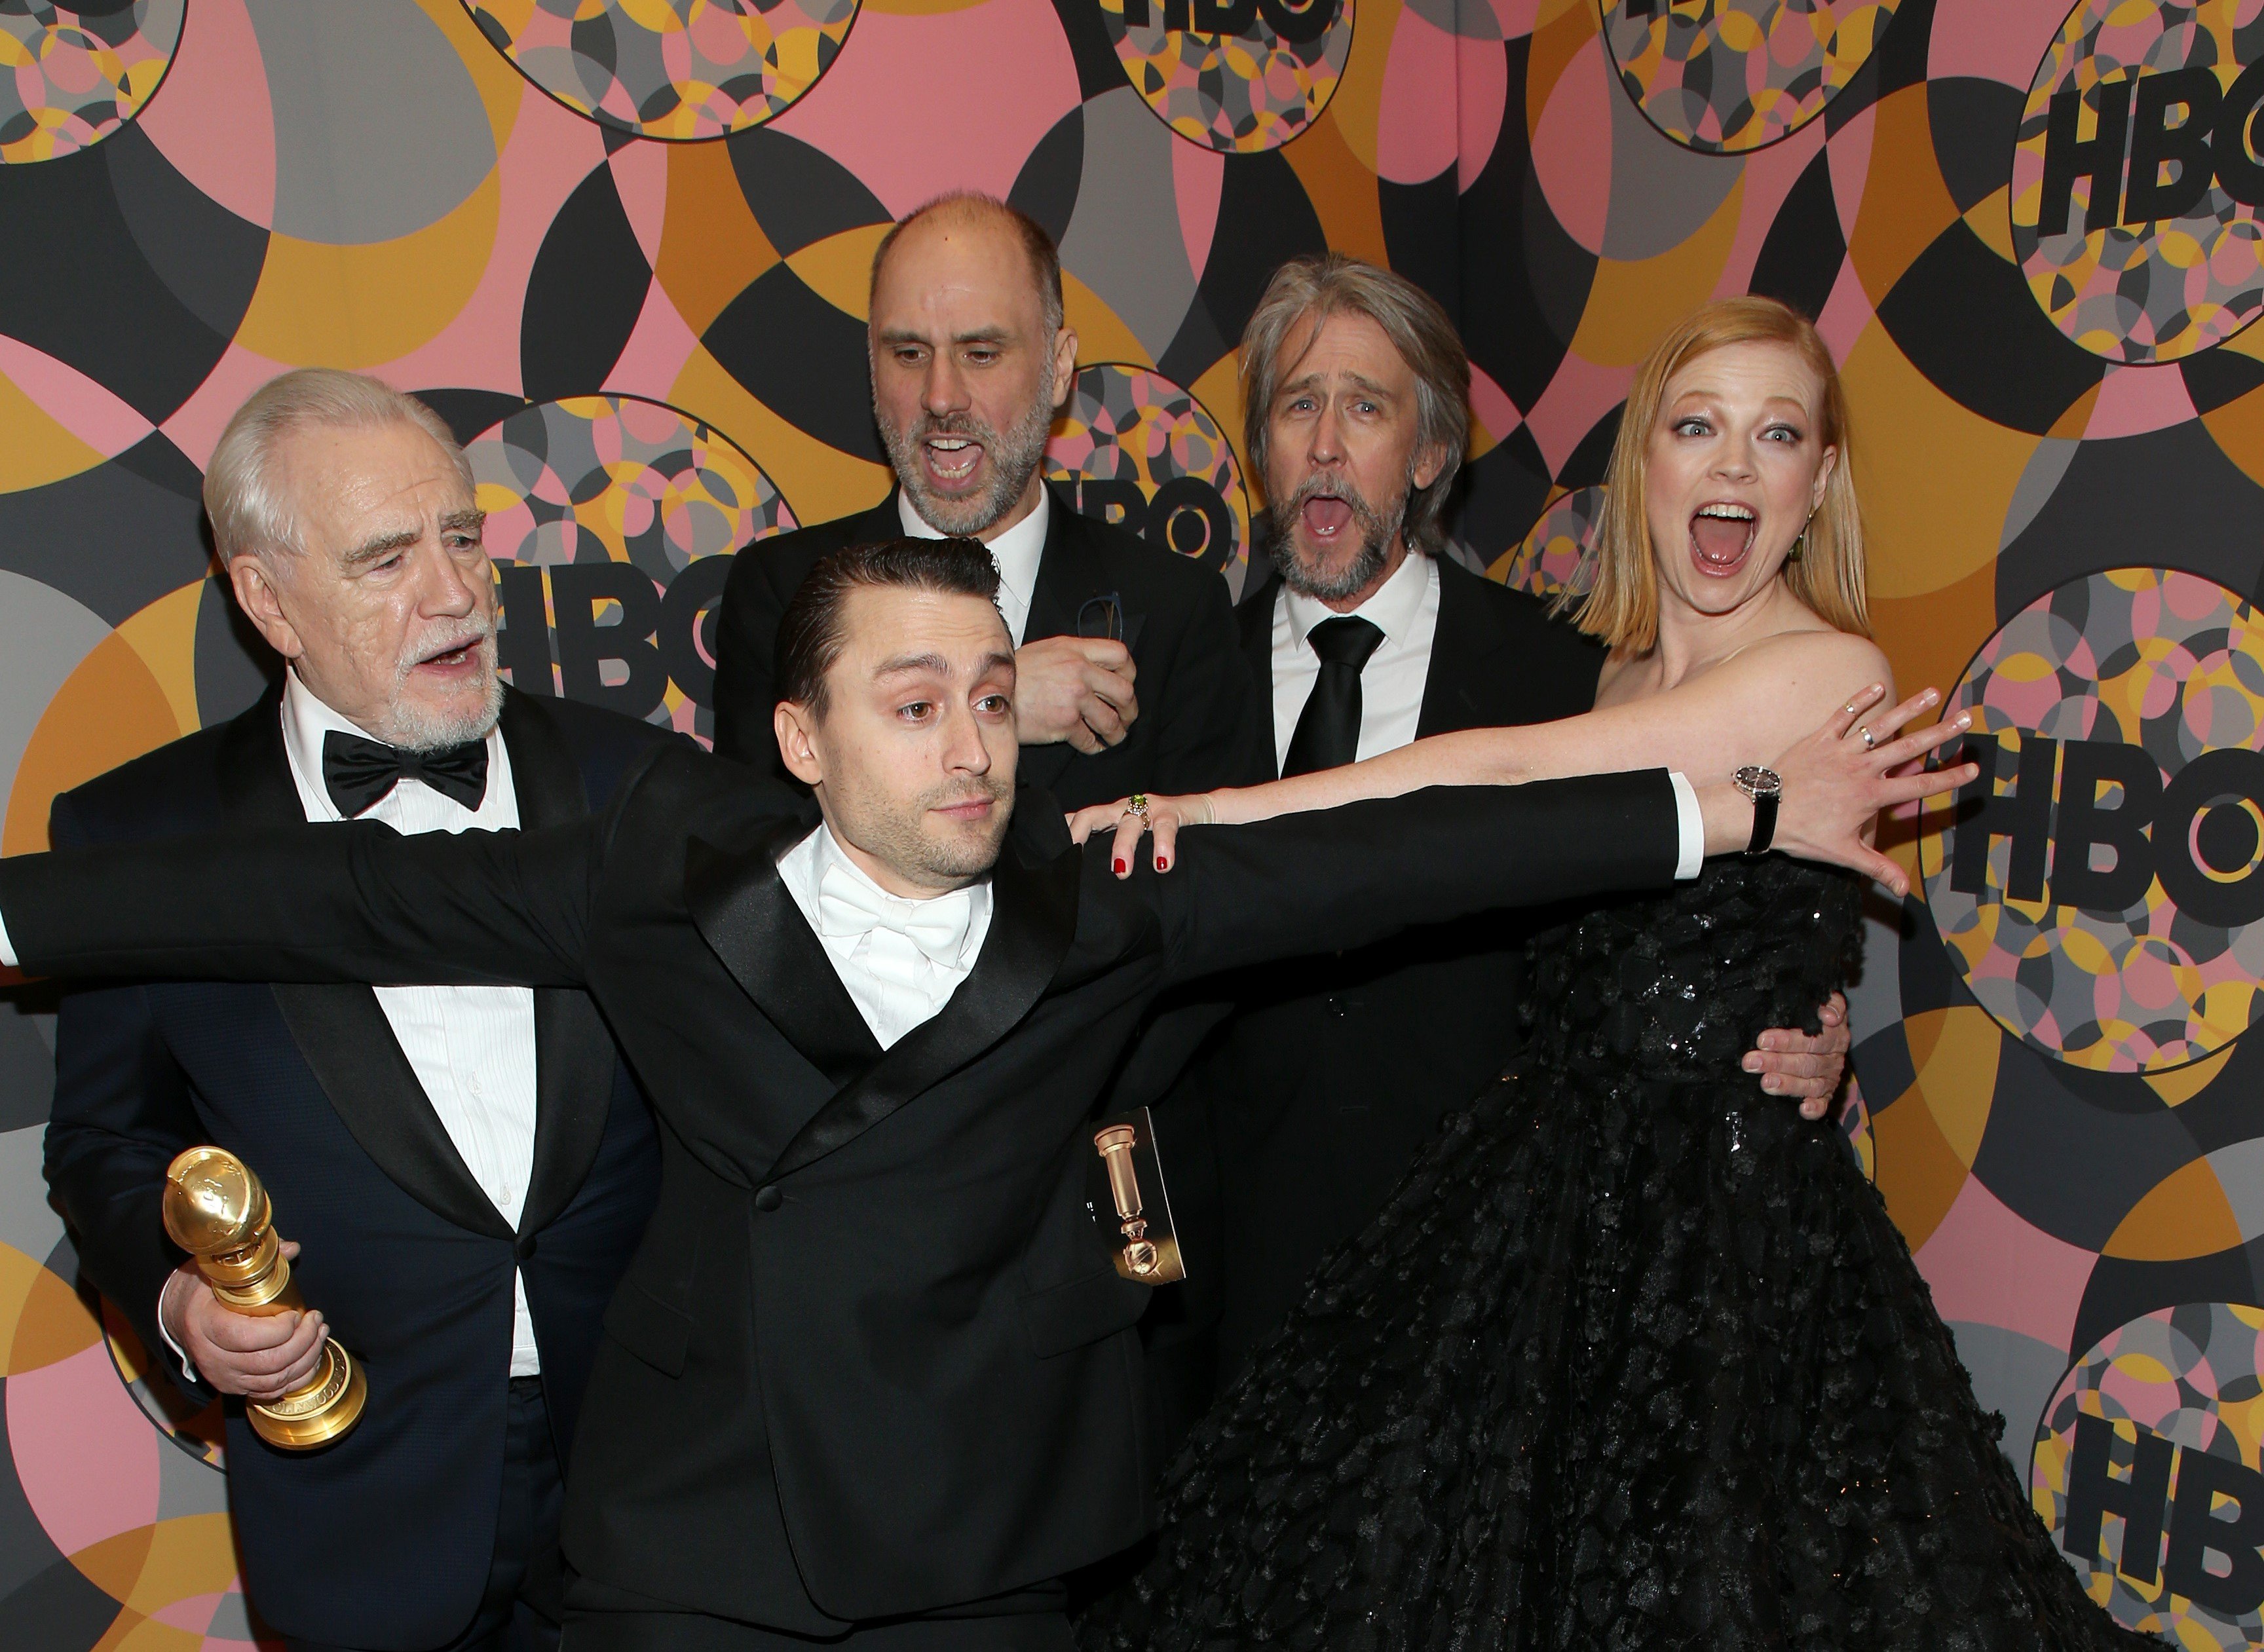 Jesse Armstrong and Succession cast members Brian Cox, Kieran Culkin, Jesse Armstrong, Alan Ruck, and Sarah Snook pose together in black outfits.